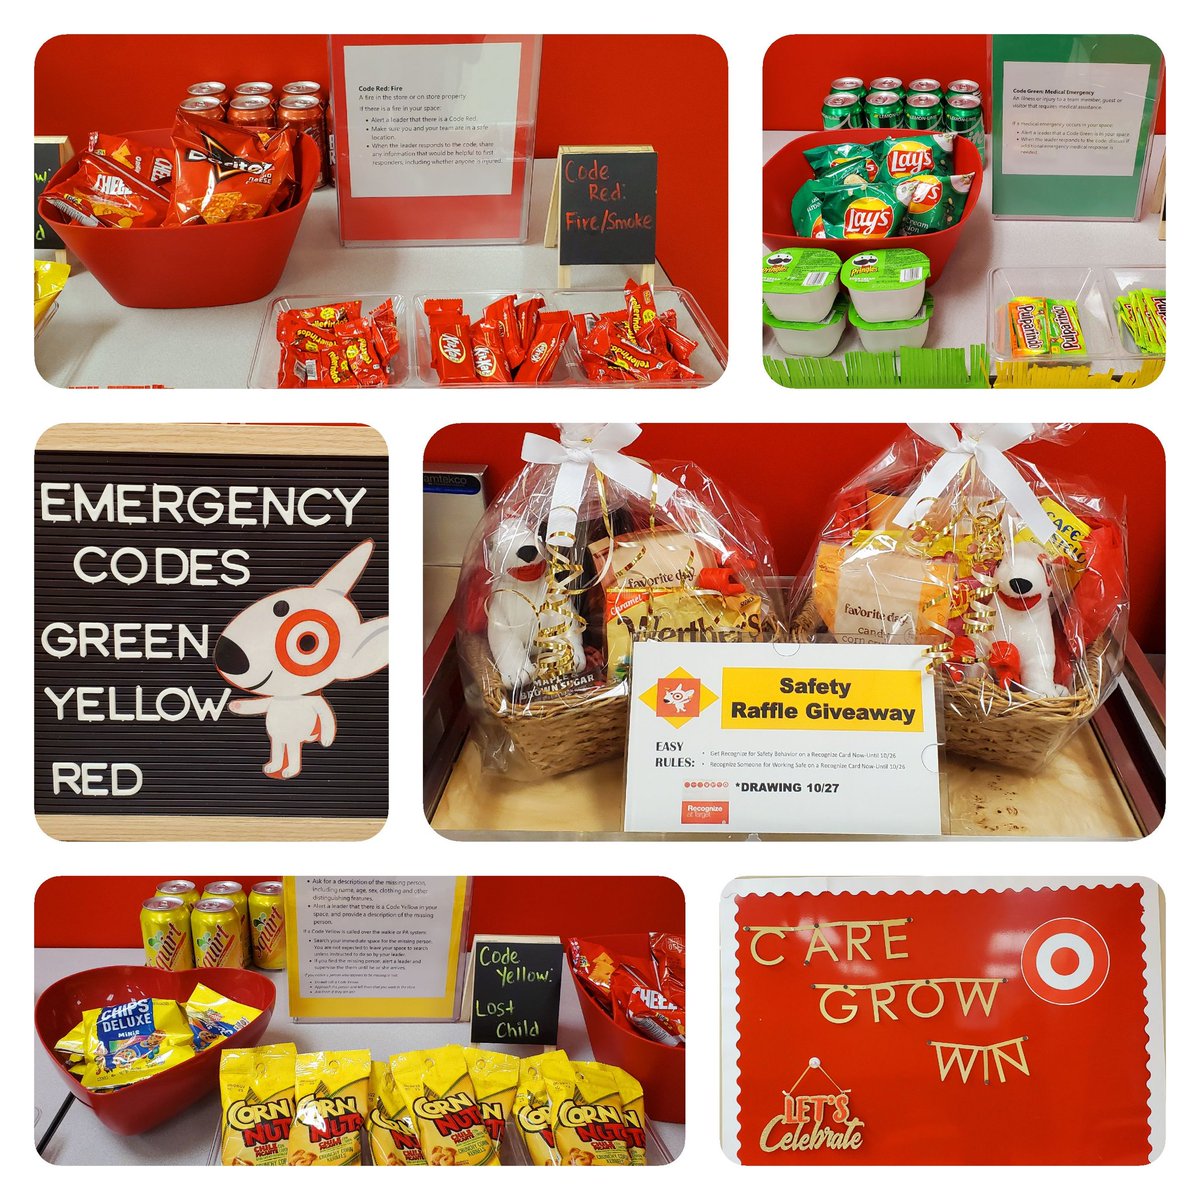 This week we created theme events to inspired the team to continue working Safely. Team loved the color snacks that represented the Emergency Codes.